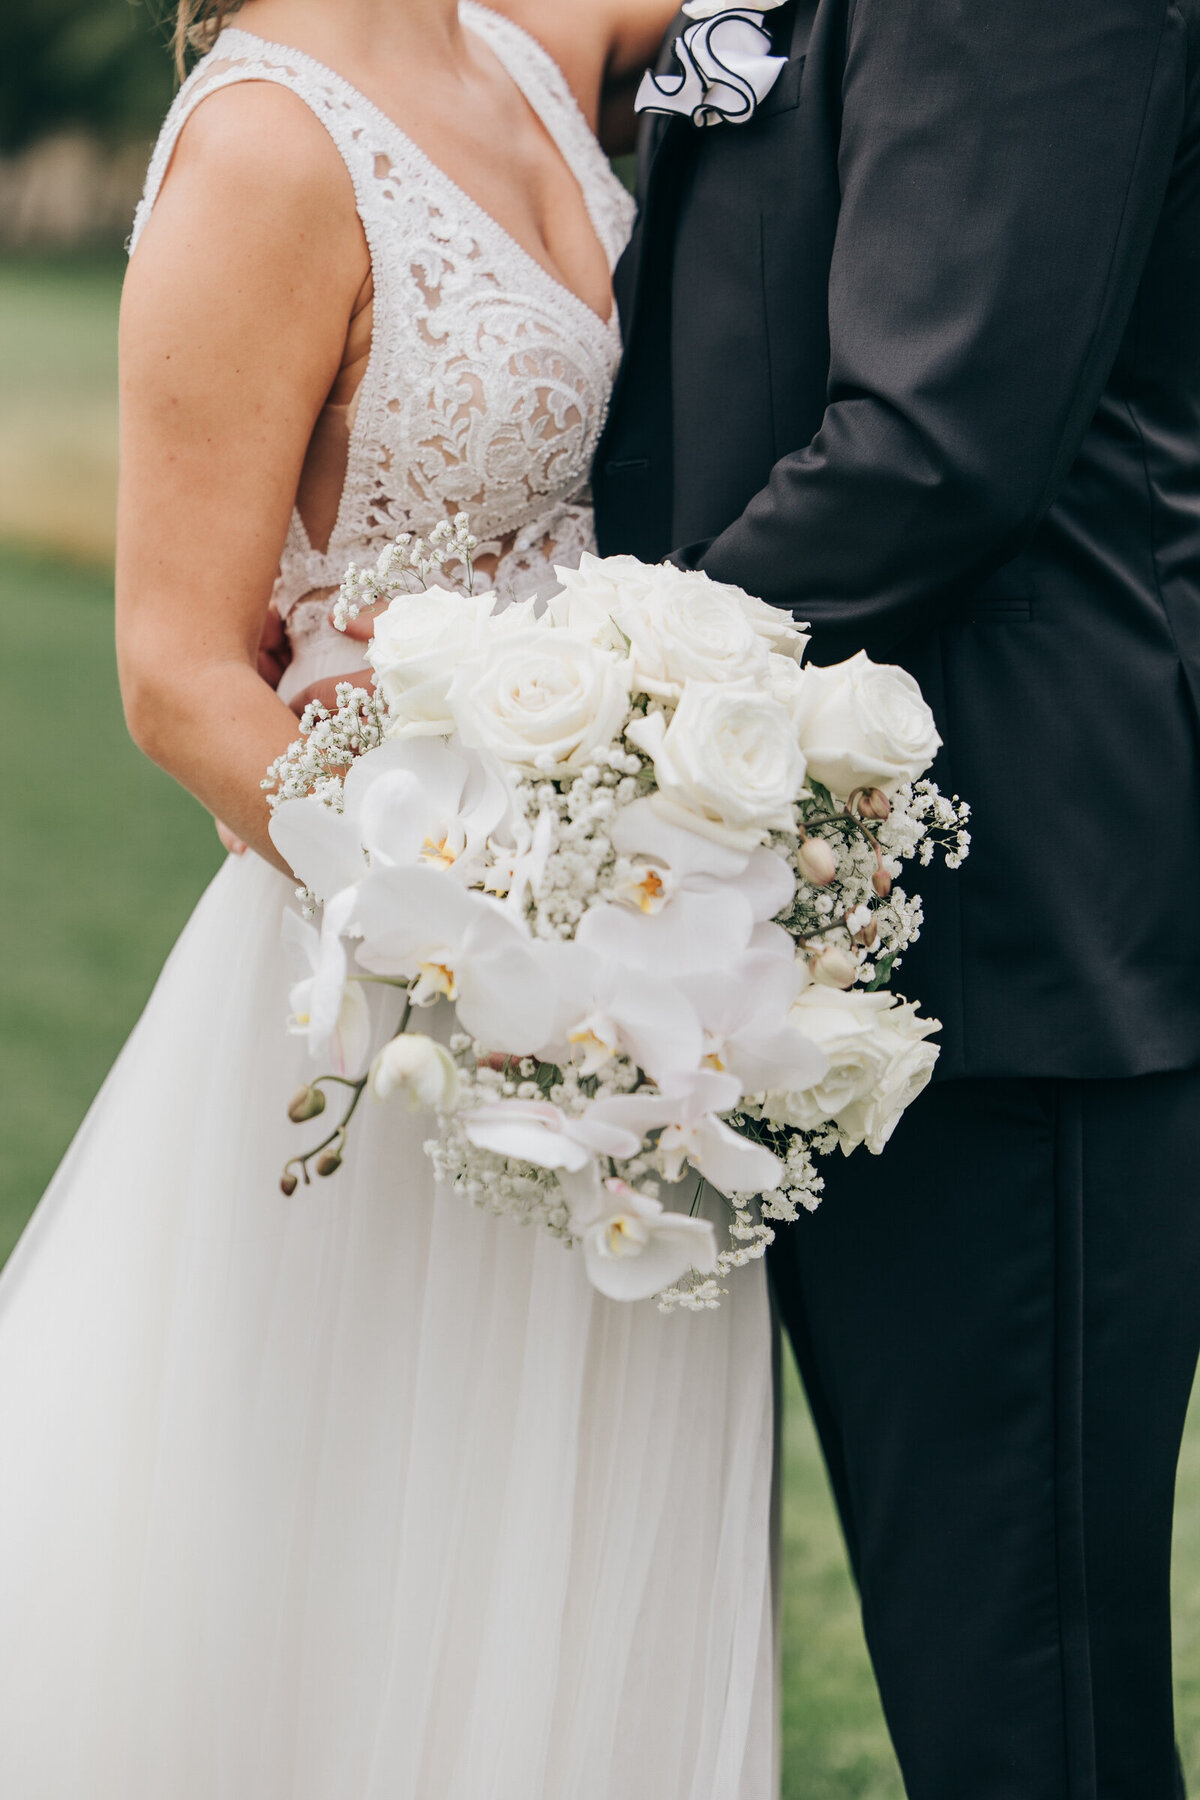 A close up of a white wedding bouquet while a bride and groom are embracing